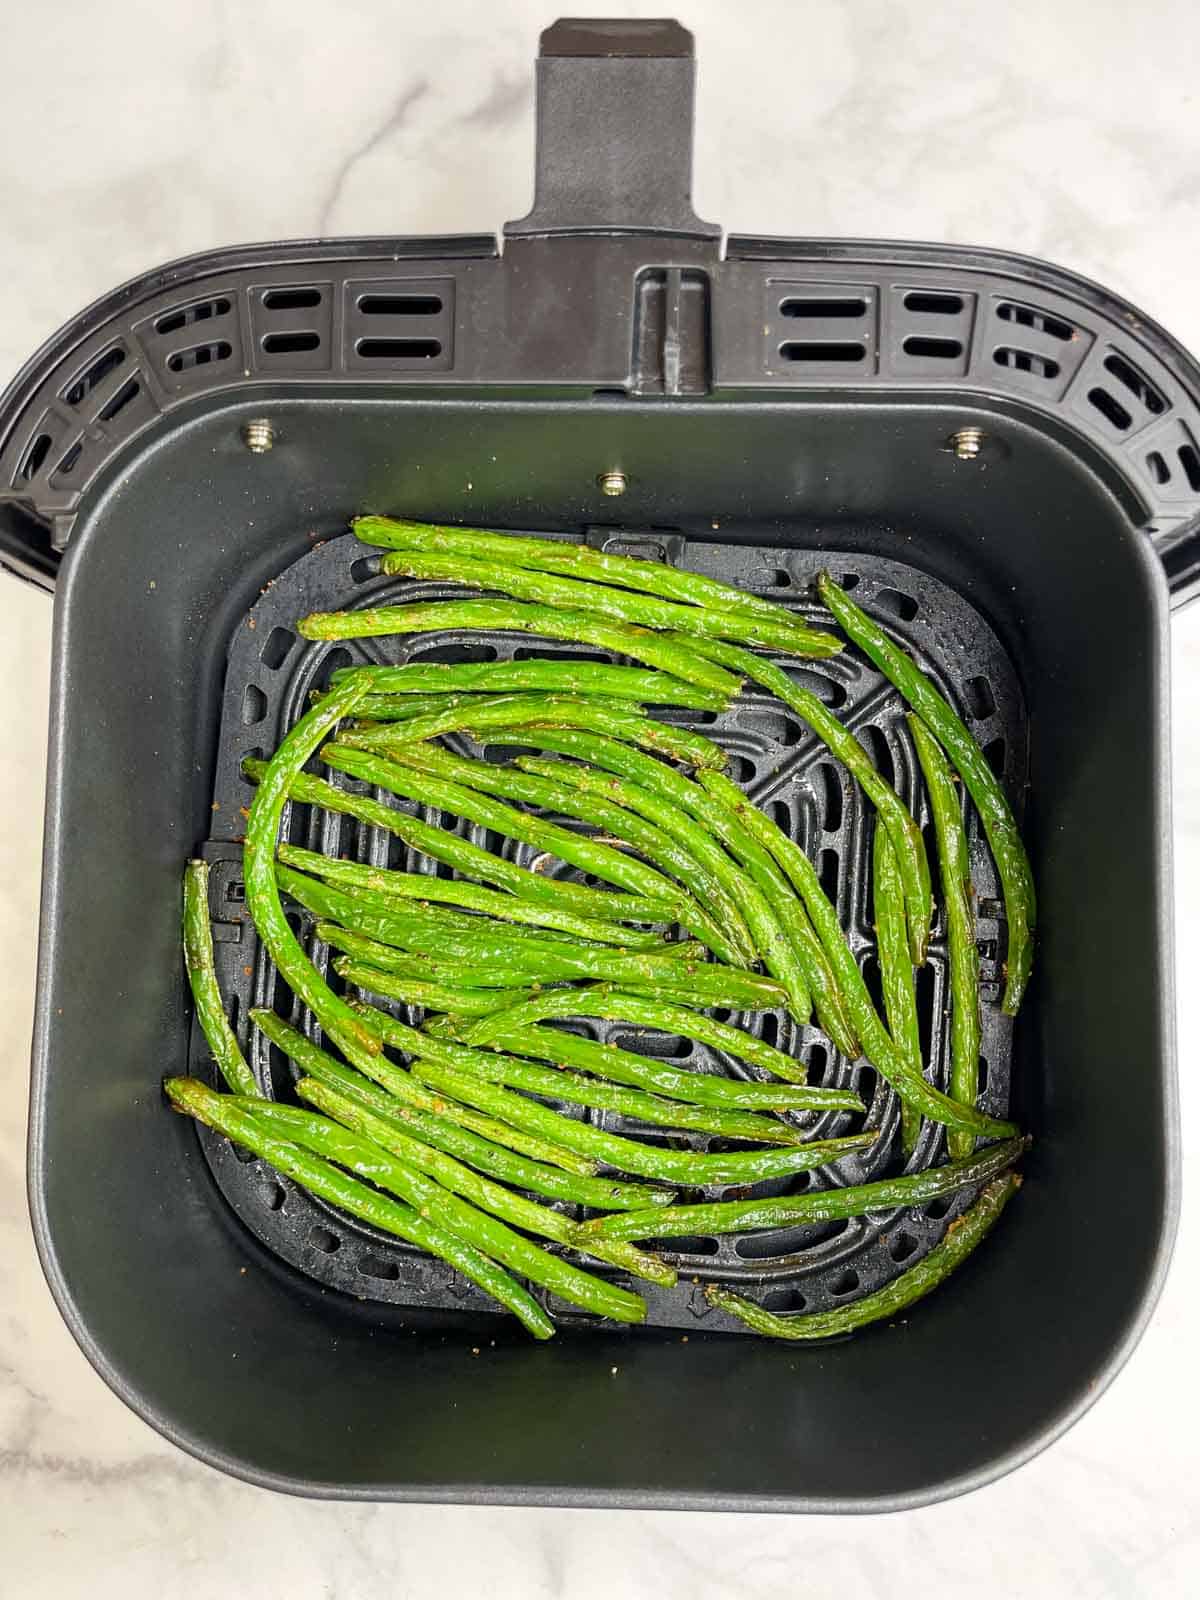 air fried green beans in the air fryer basket